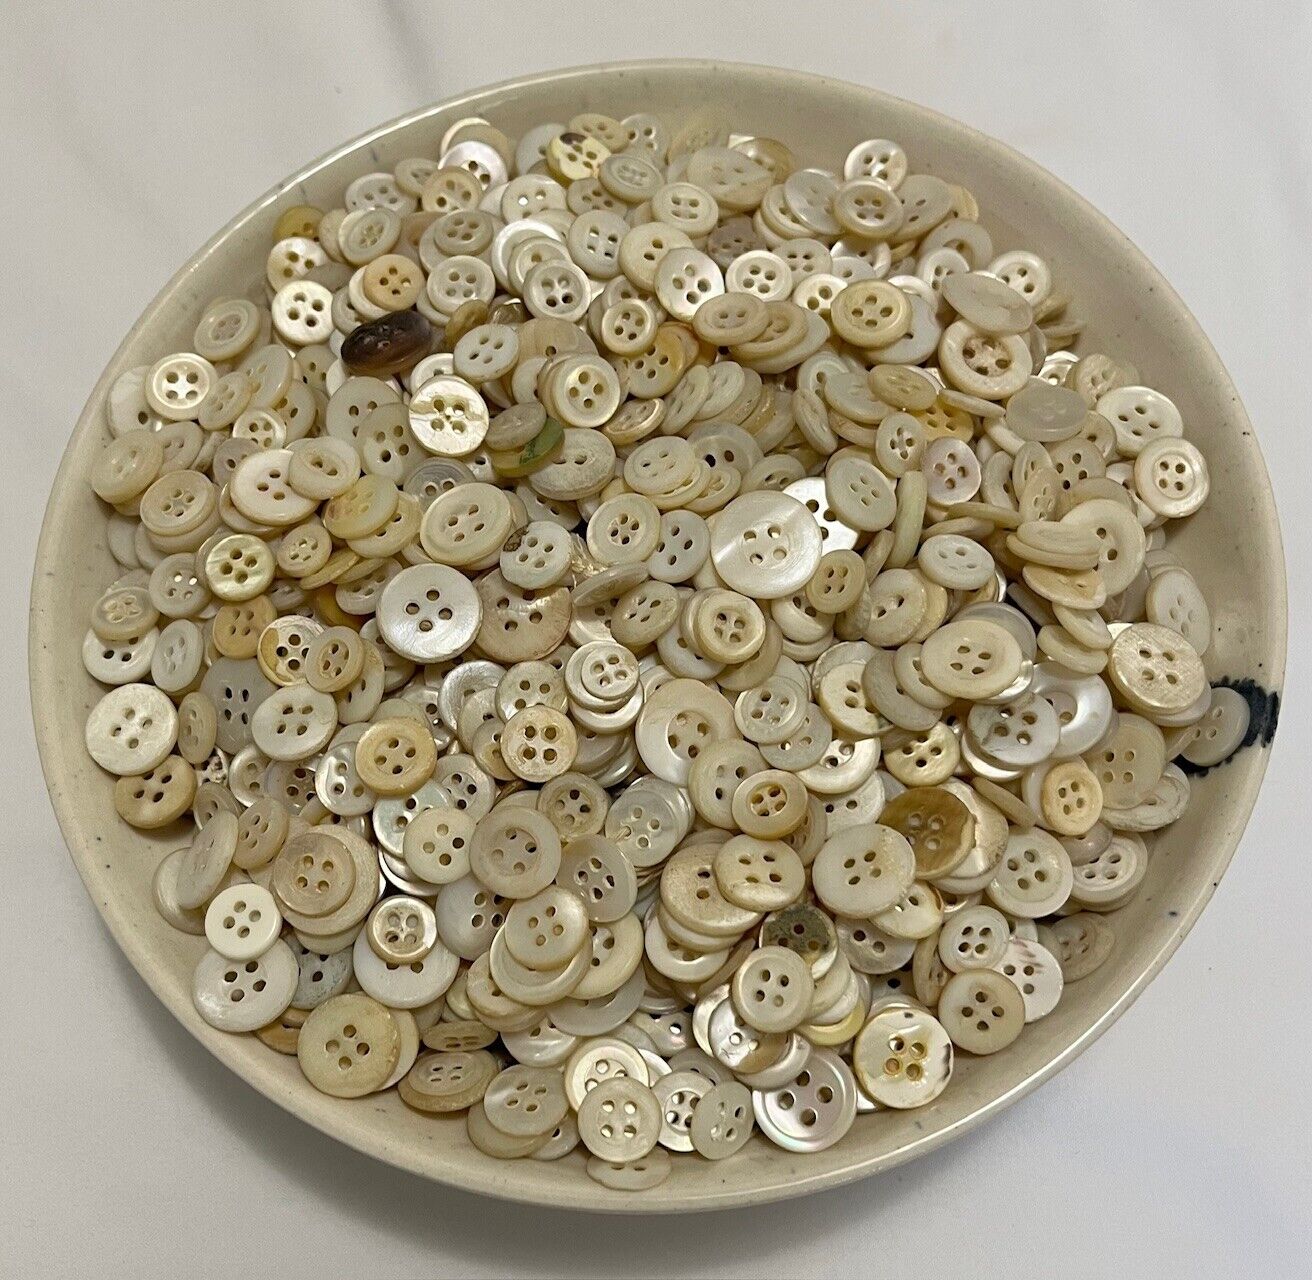 Huge Lot of 2,000+, 2 Pounds, MOP, Mother of Pearl Shell Vintage Buttons, 4-Hole